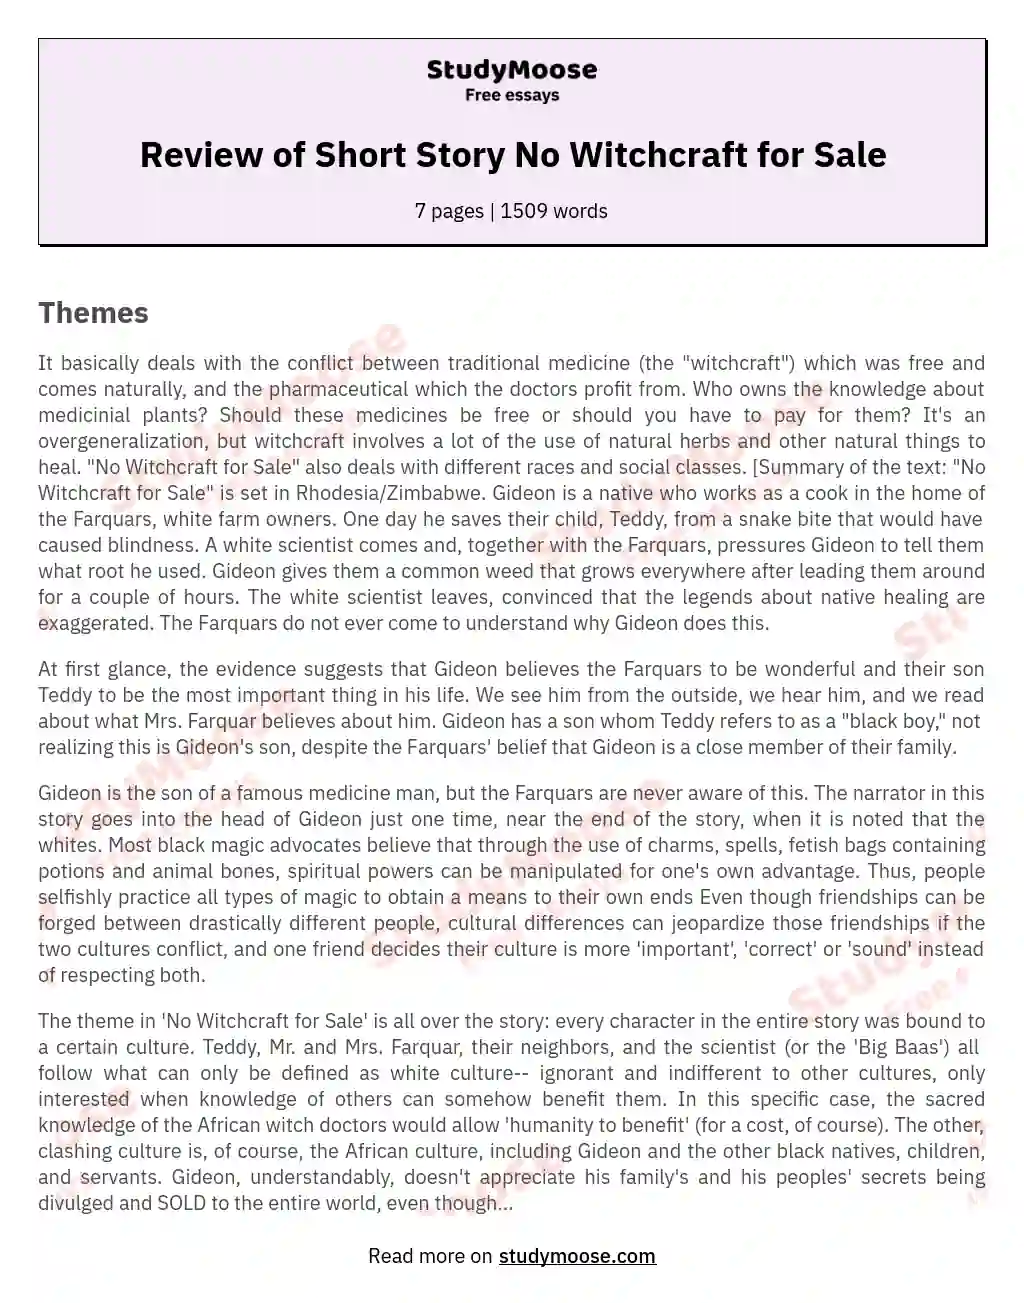 Review of Short Story No Witchcraft for Sale